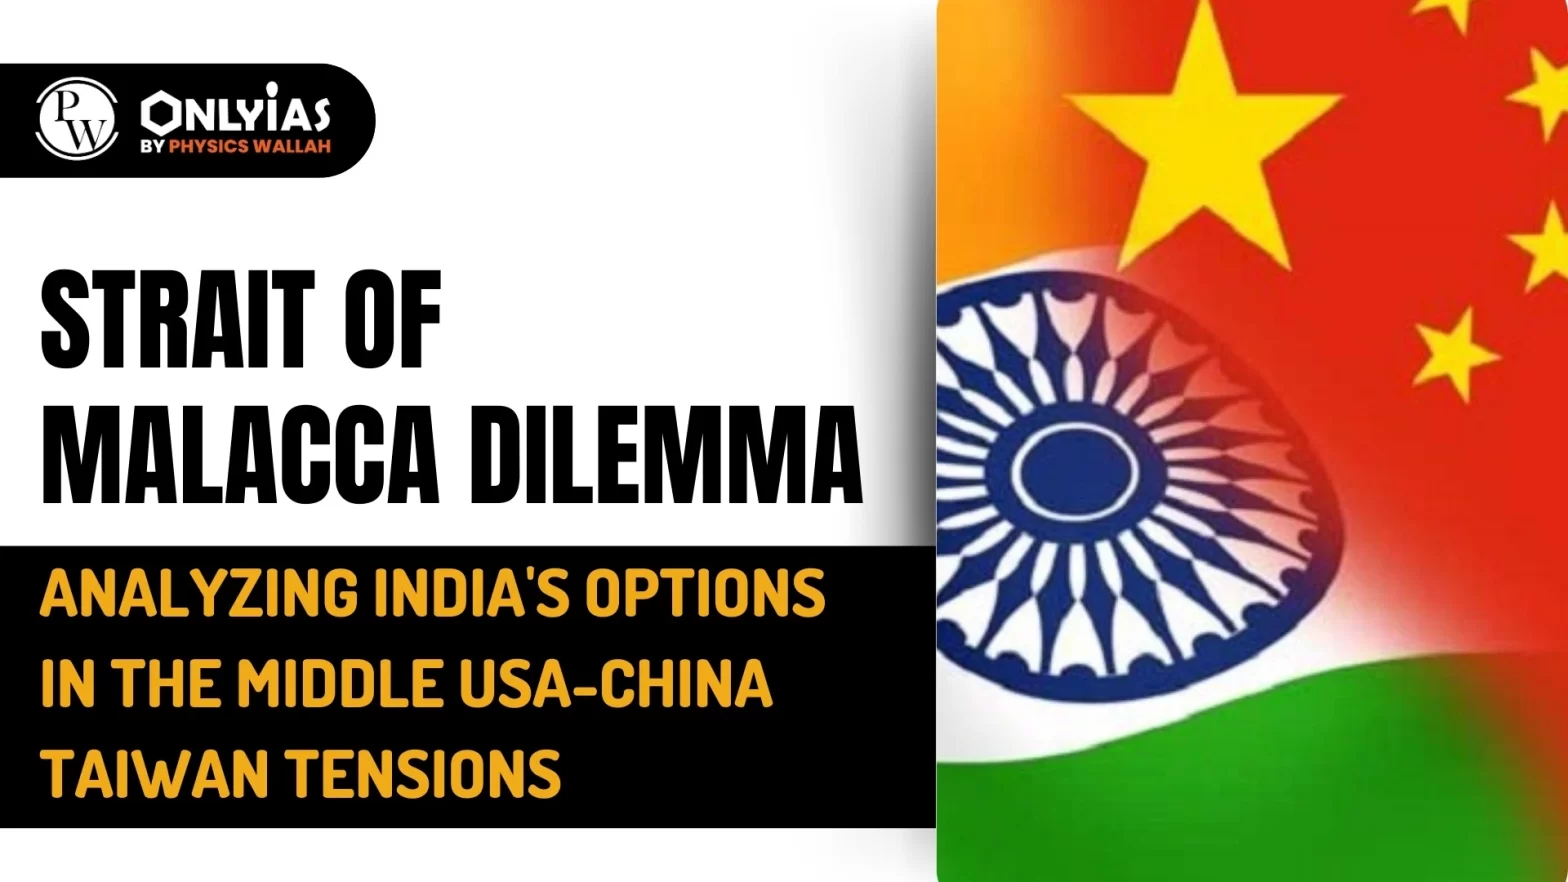 Strait of Malacca Dilemma: Analyzing India’s Options in the Middle USA-China Taiwan Tensions